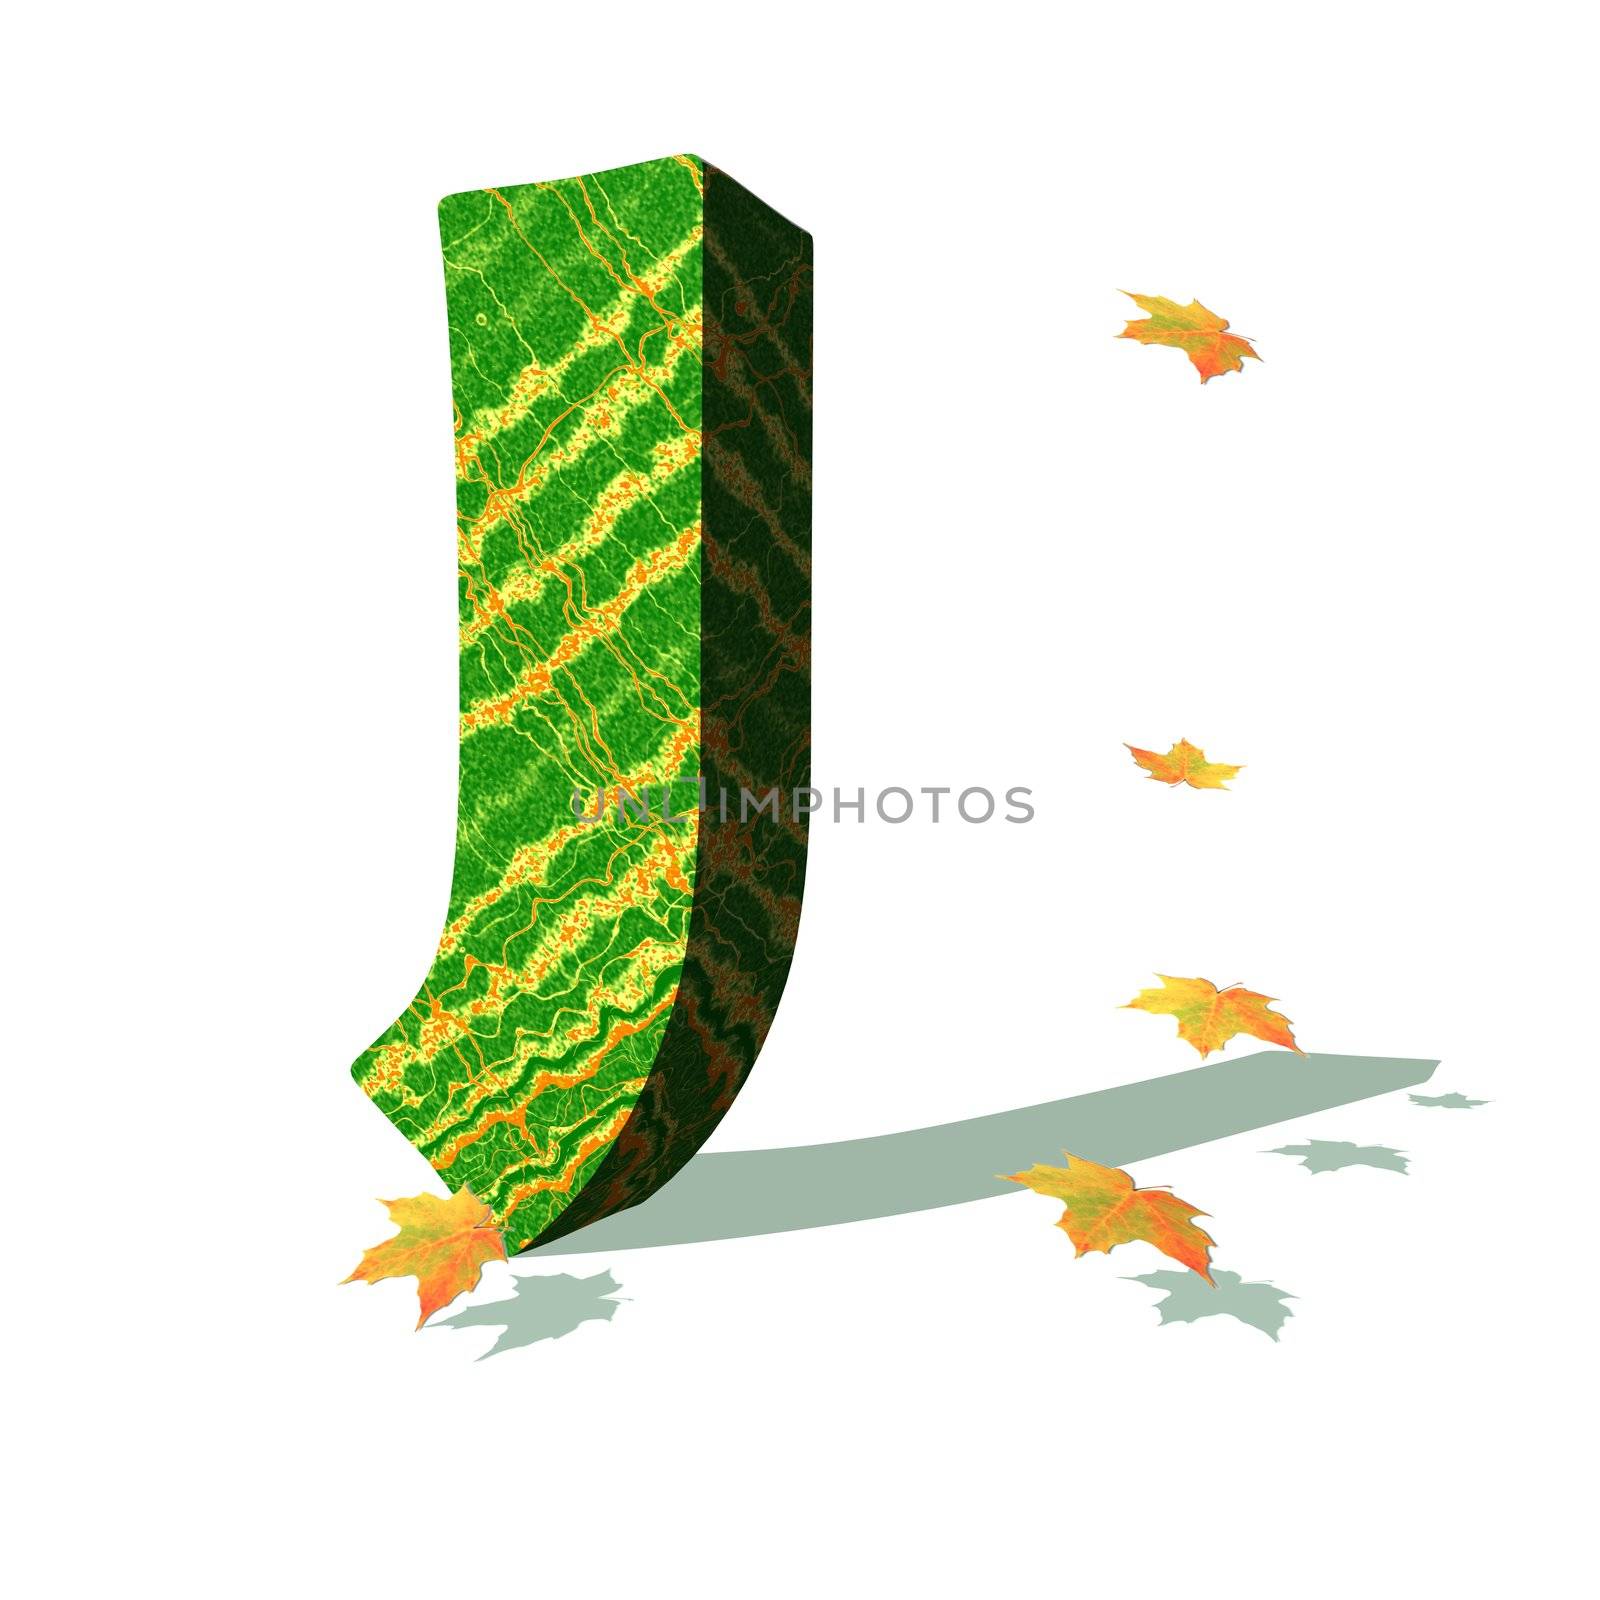 Green ecological J capital letter surrounded by few autumn falling leaves in a white background with shadows